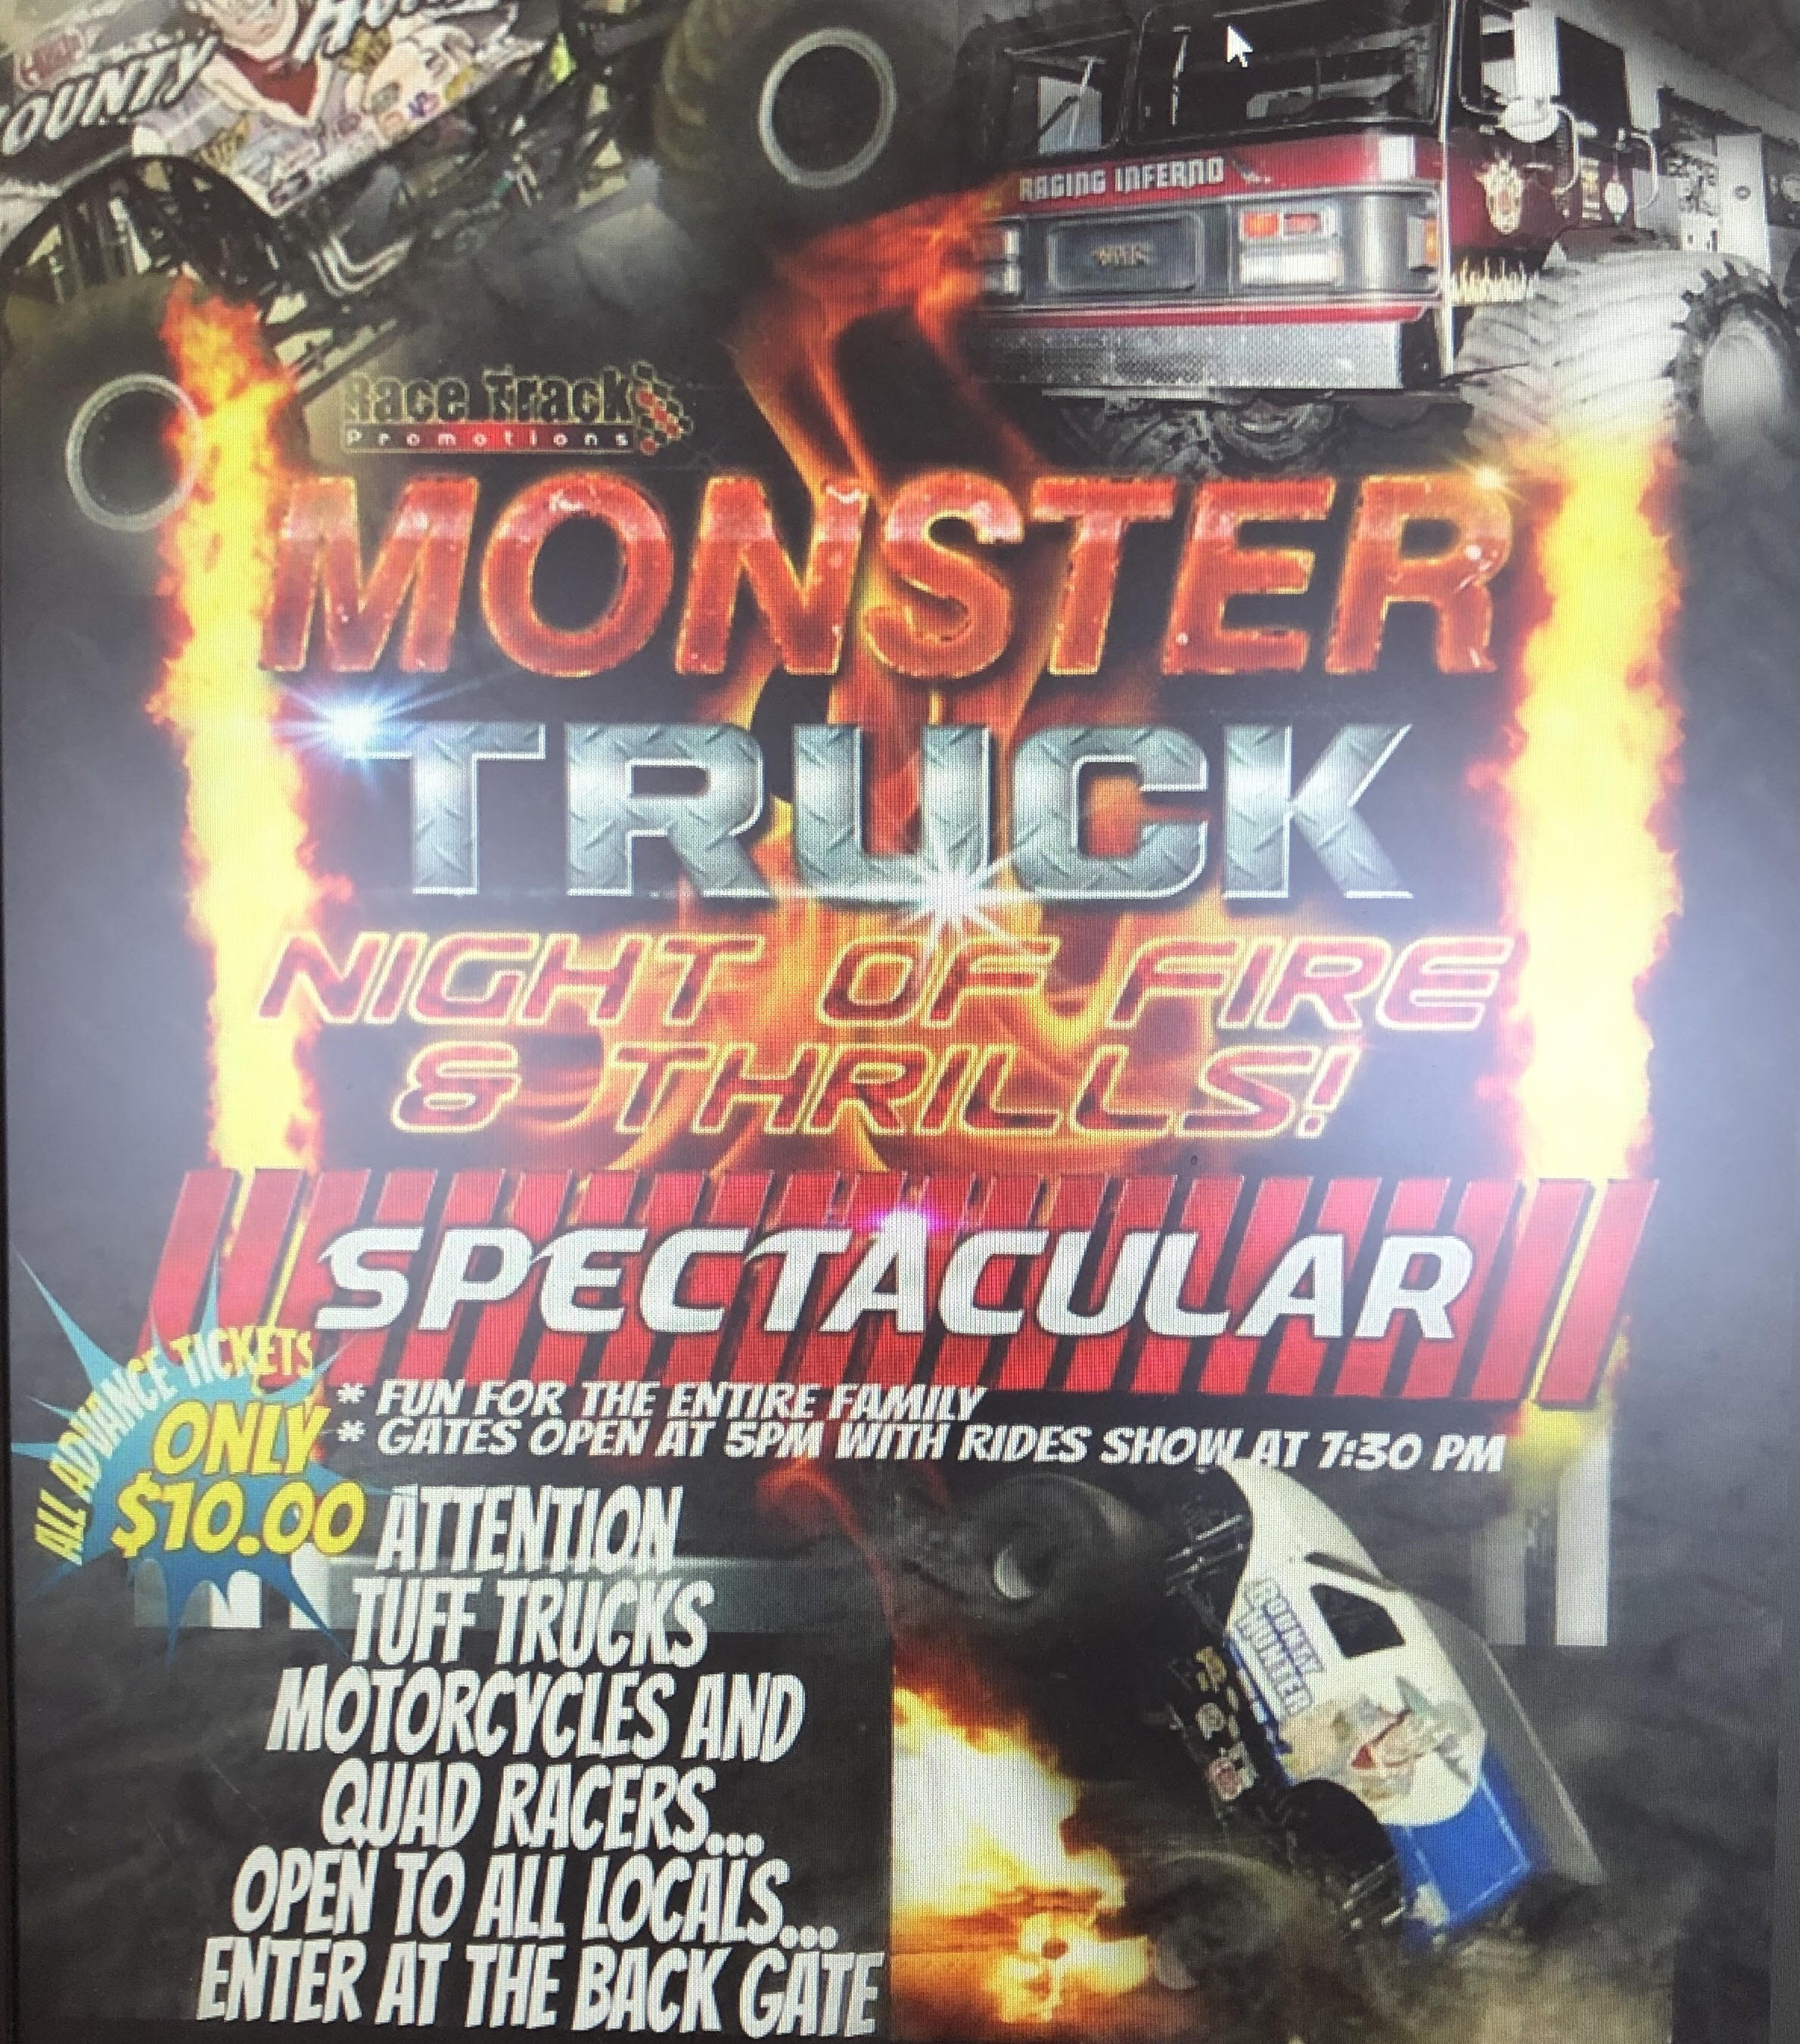 <h1 class="tribe-events-single-event-title">Monster Truck Night of Fire & Thrills</h1>